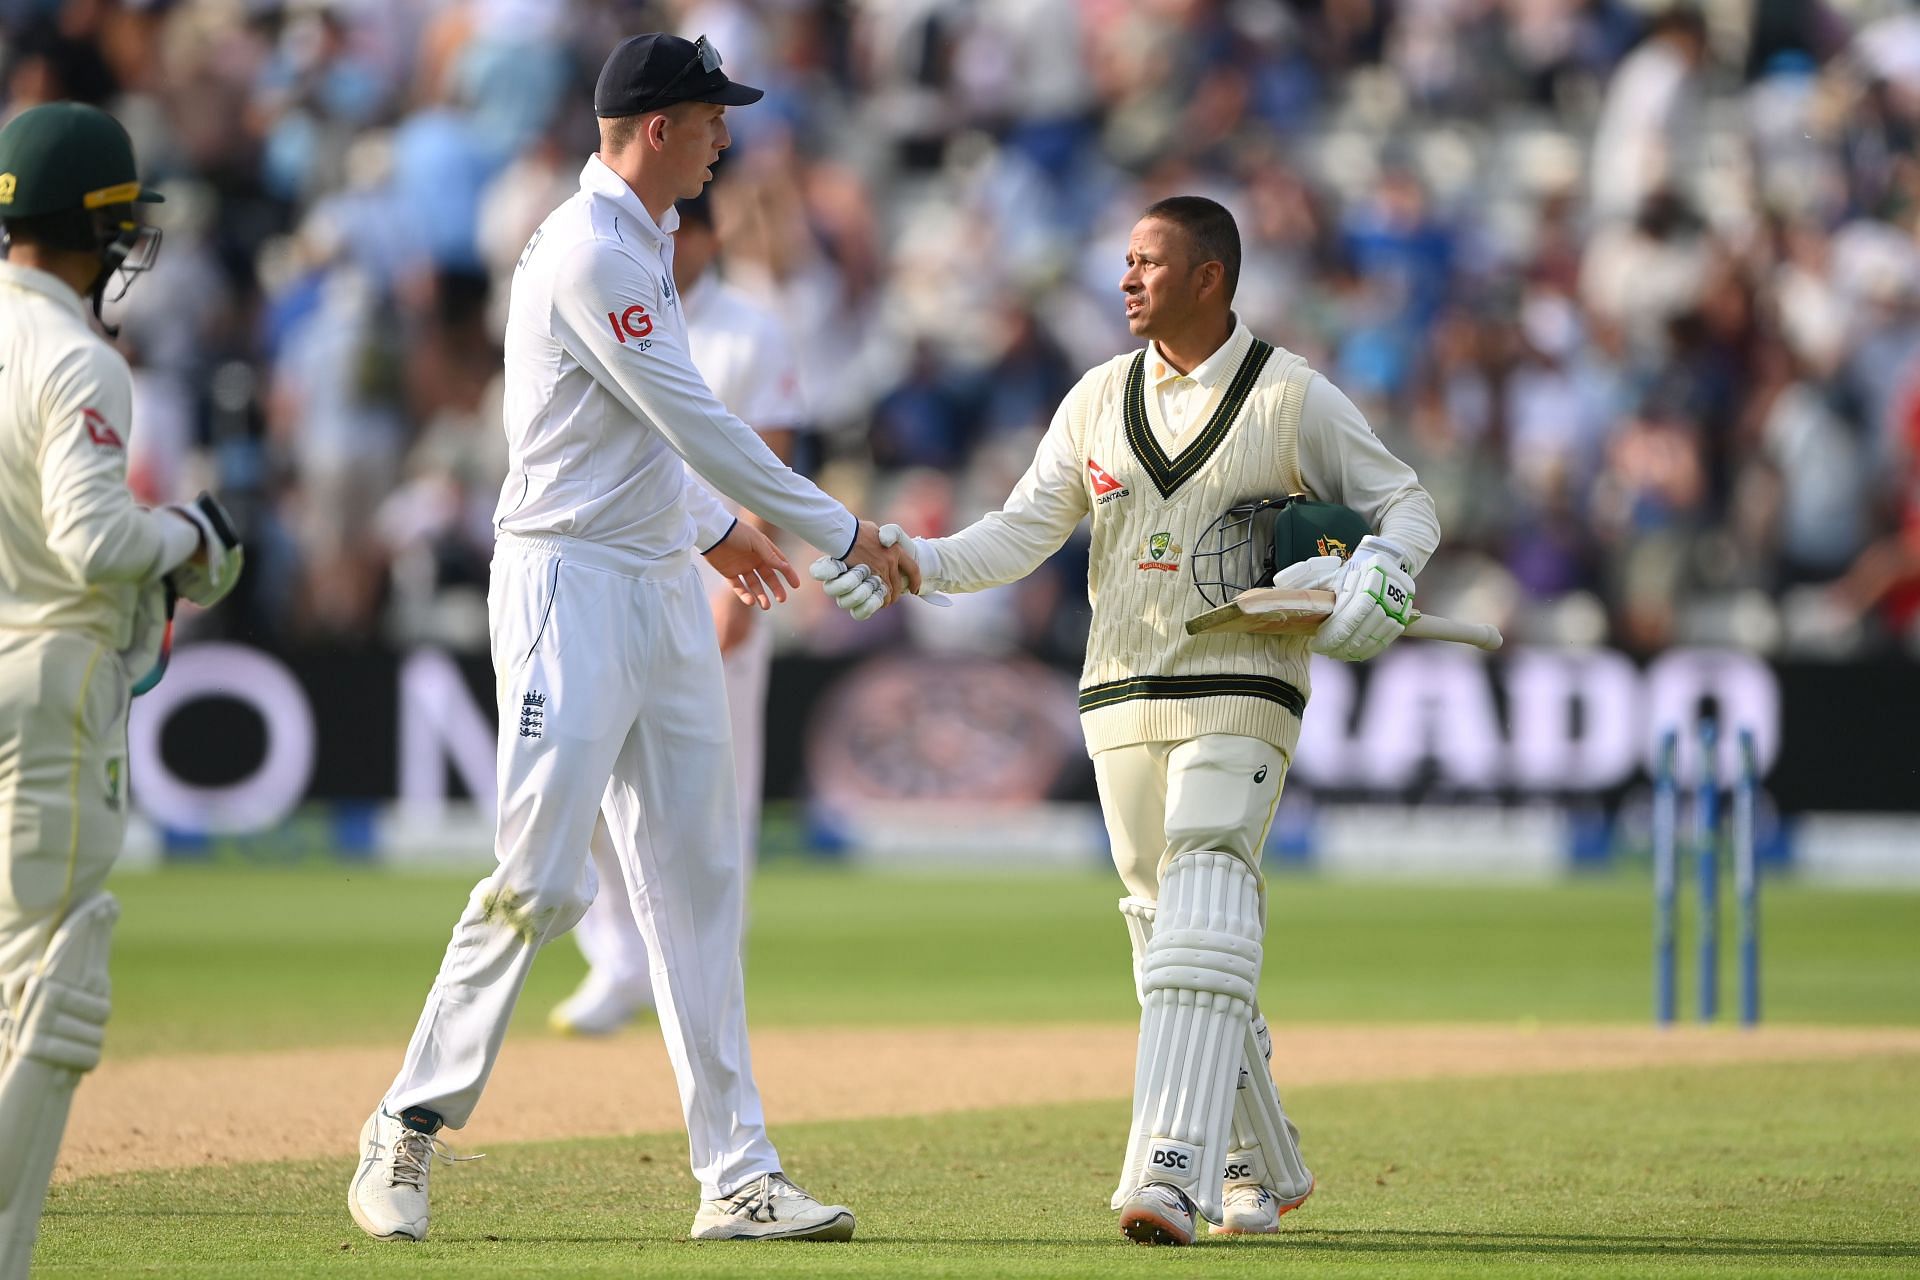 Zach Crowley congratulates the Centurion after his innings.  (Credits: Getty)